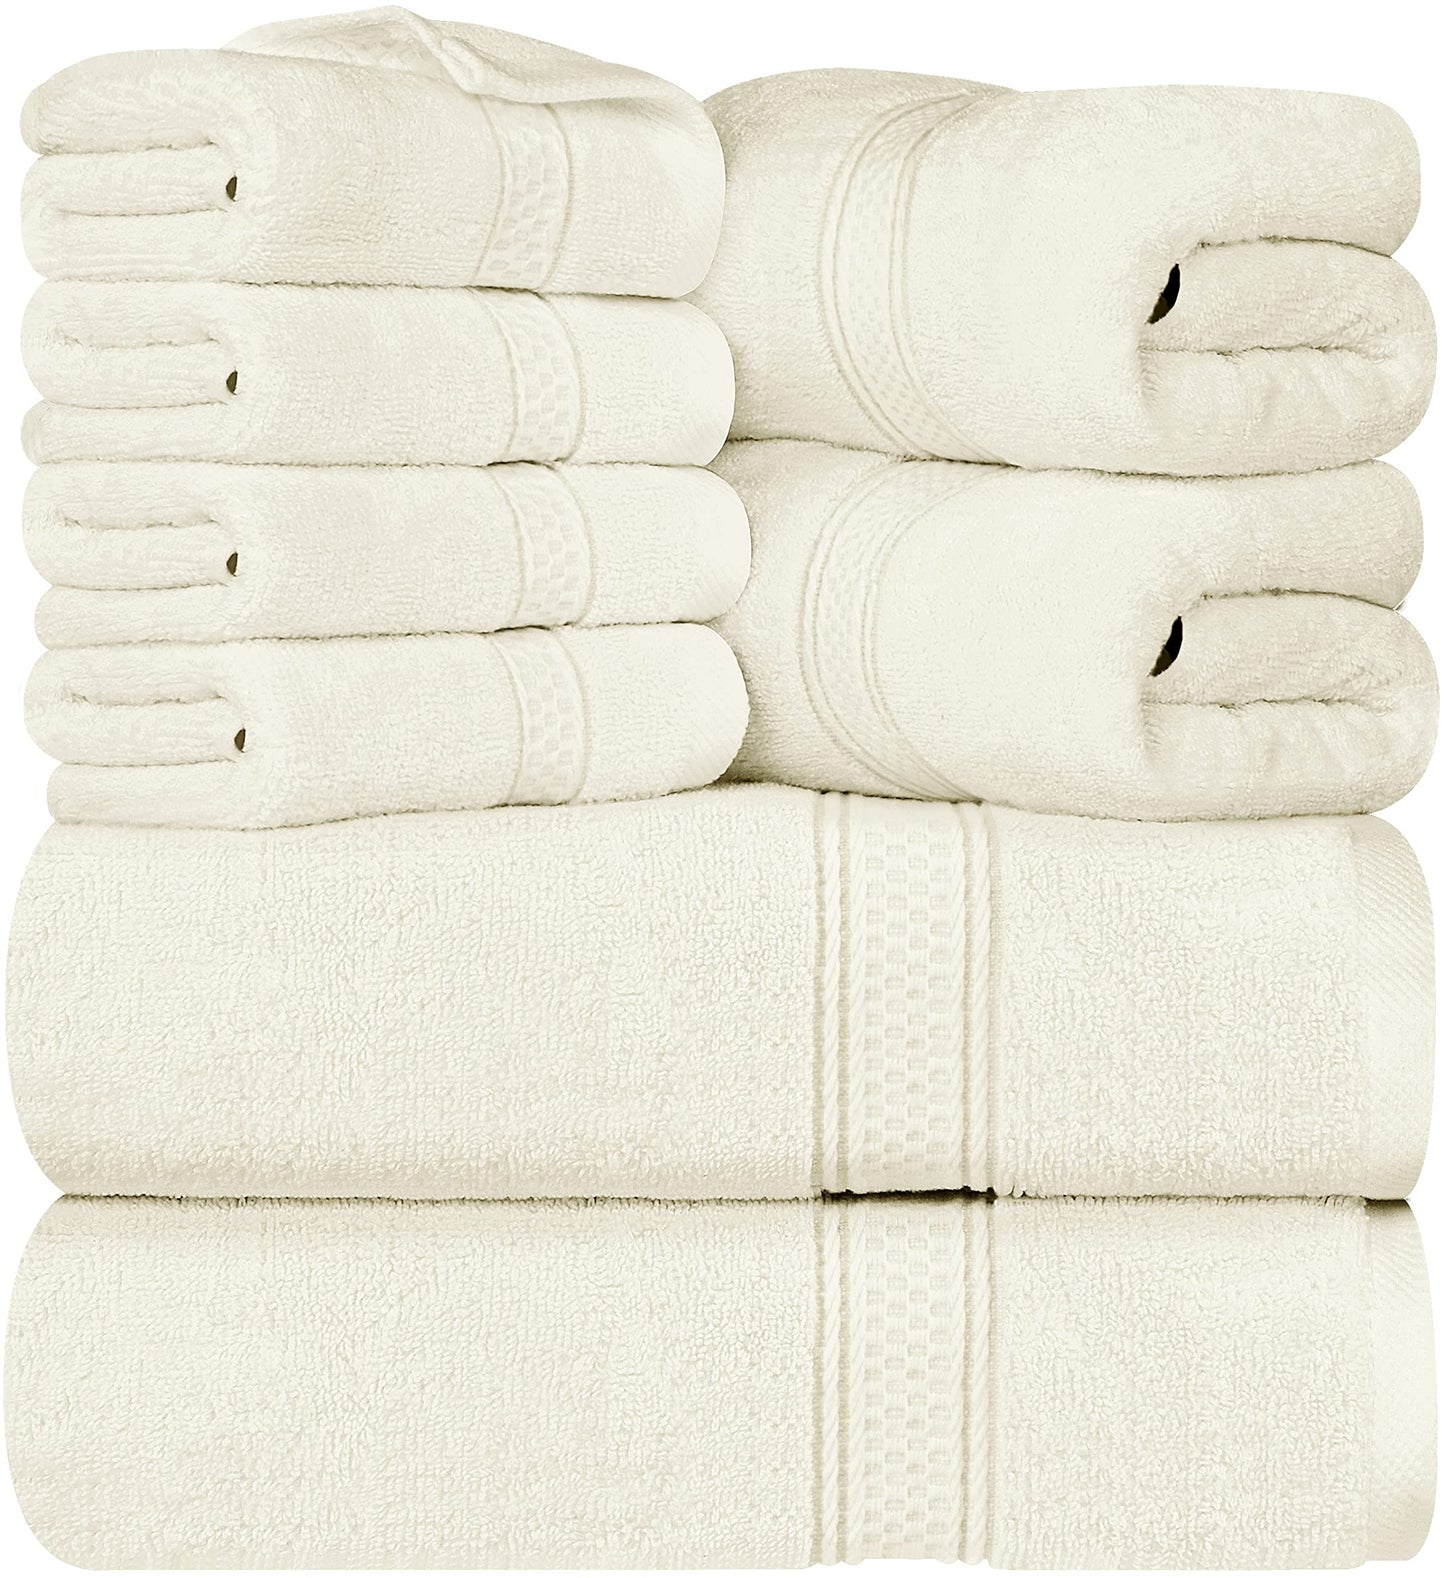 Utopia Towels 8-Piece Premium Towel Set, 2 Bath Towels, 2 Hand Towels, and 4 Wash Cloths, 600 GSM 100% Ring Spun Cotton Highly Absorbent Towels for Bathroom, Gym, Hotel, and Spa (Ivory)